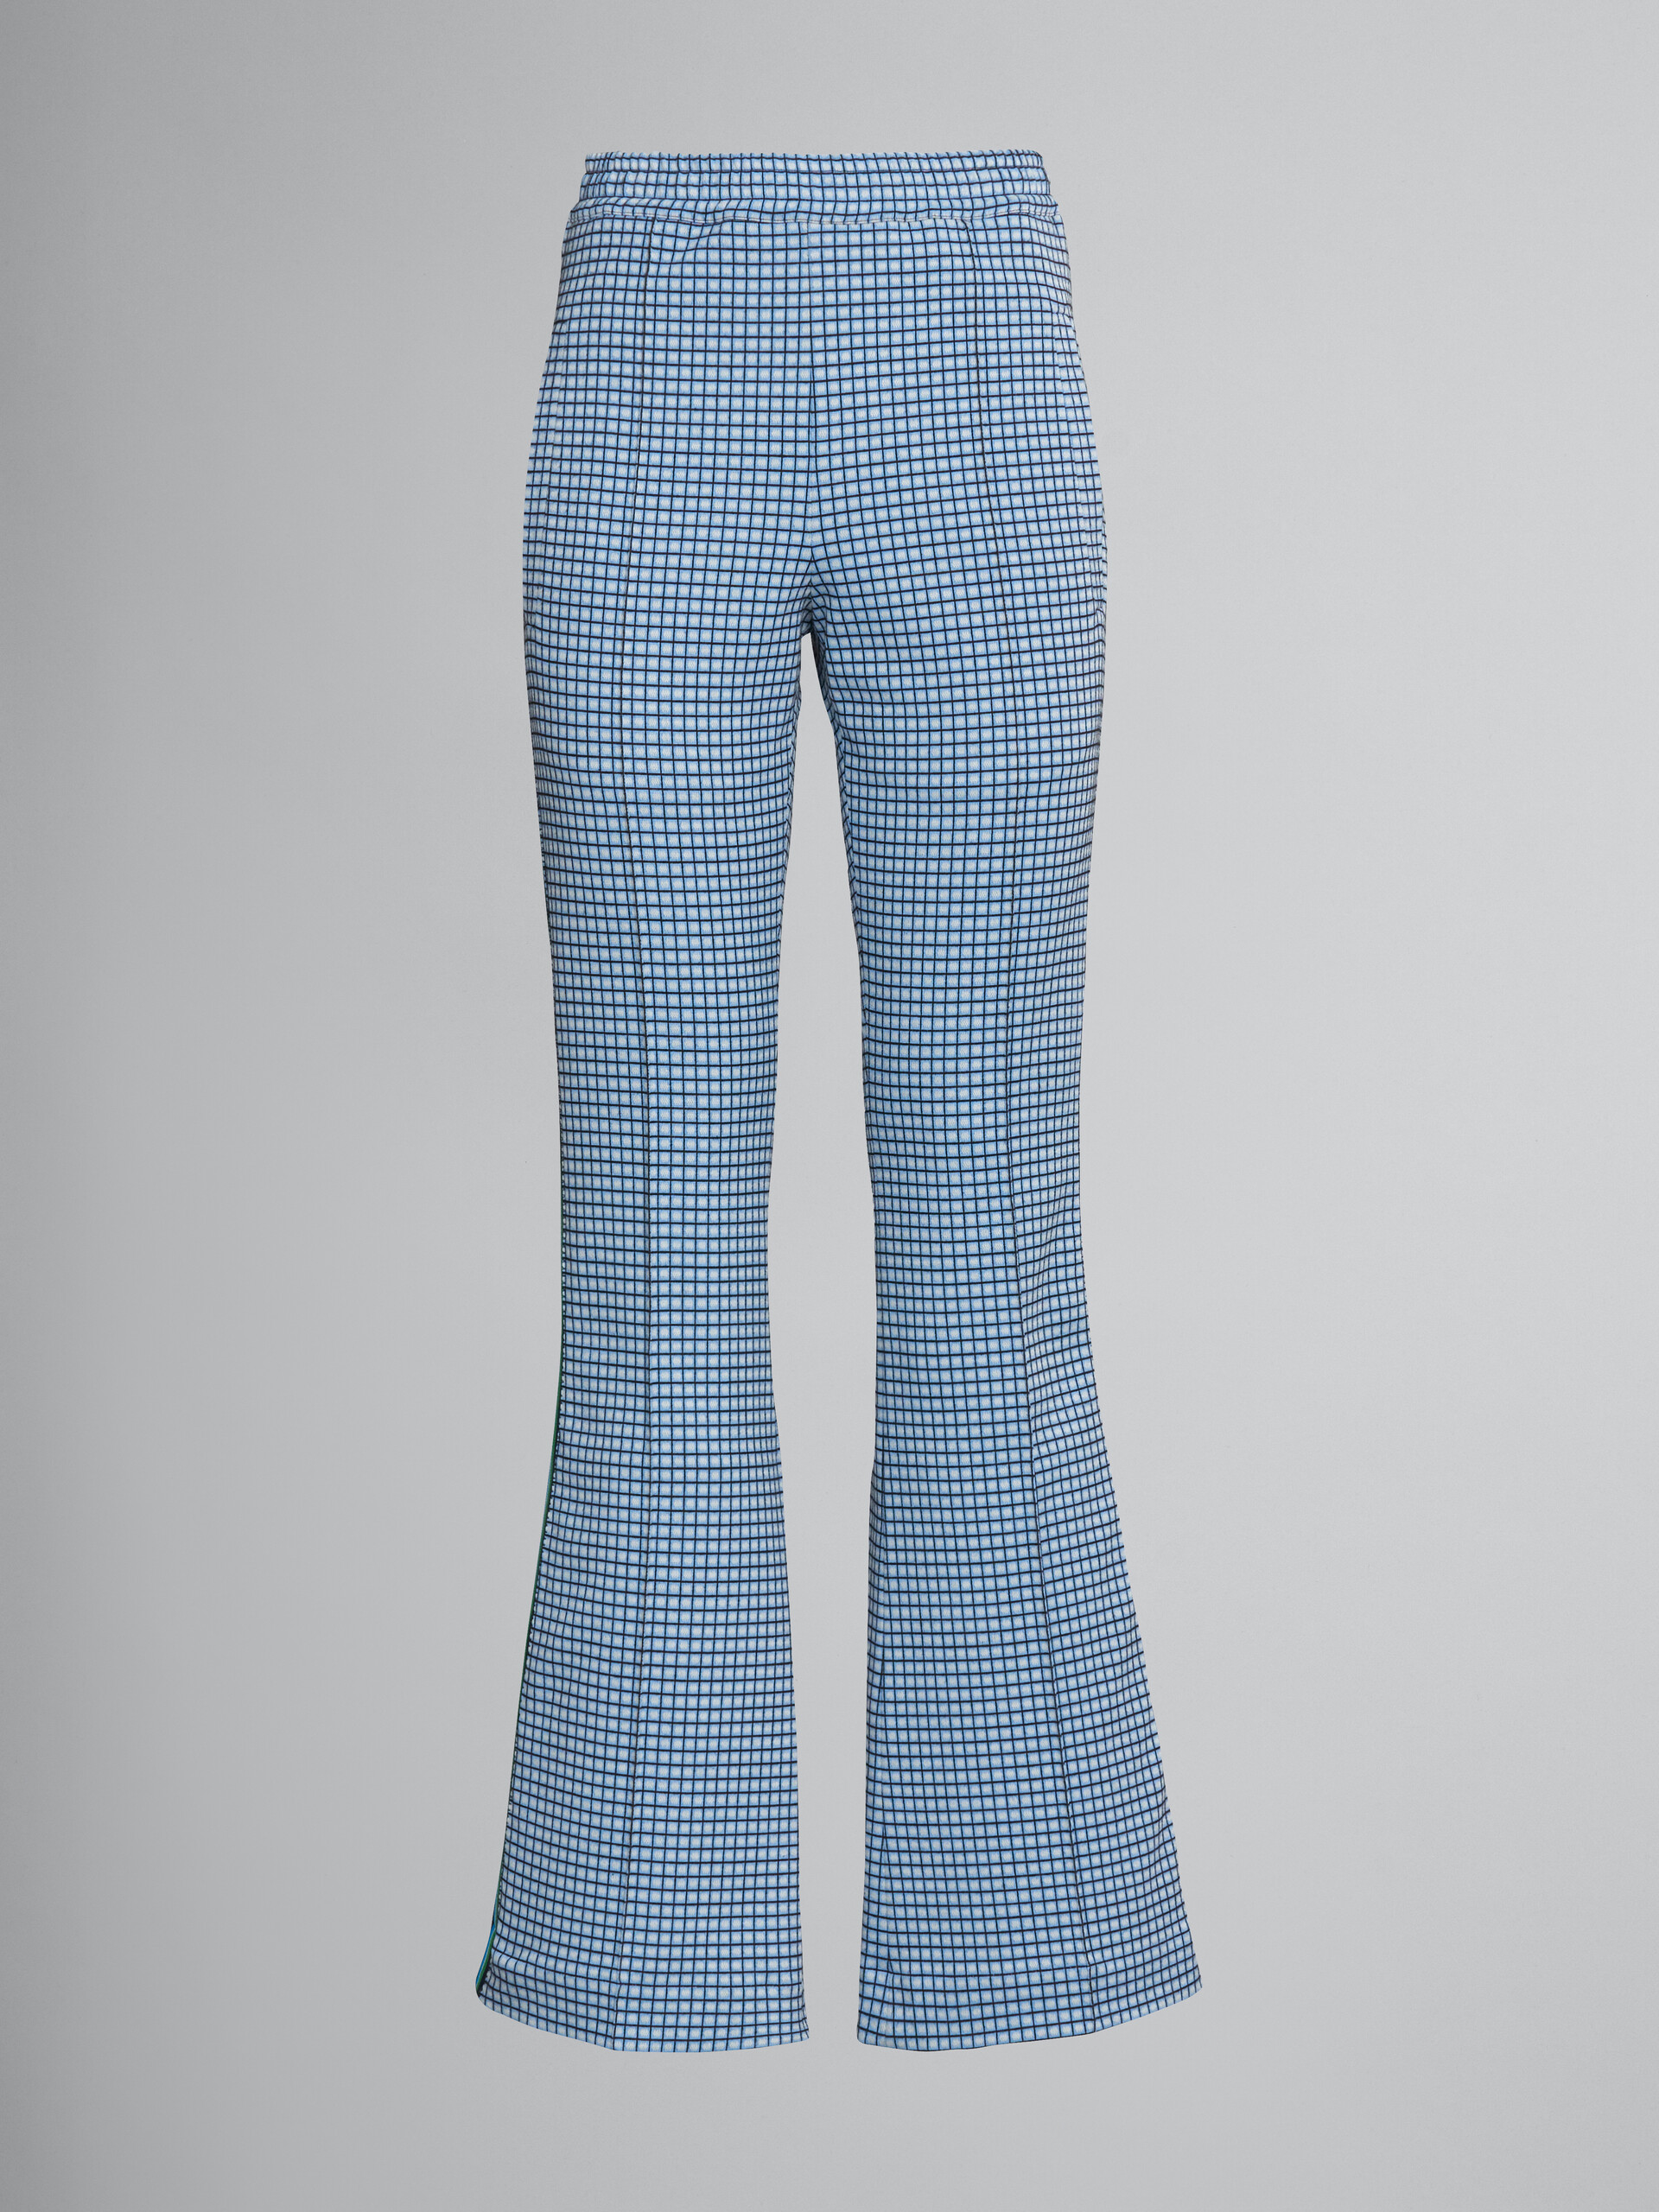 Flared trousers in light blue jacquard fabric - Pants - Image 1